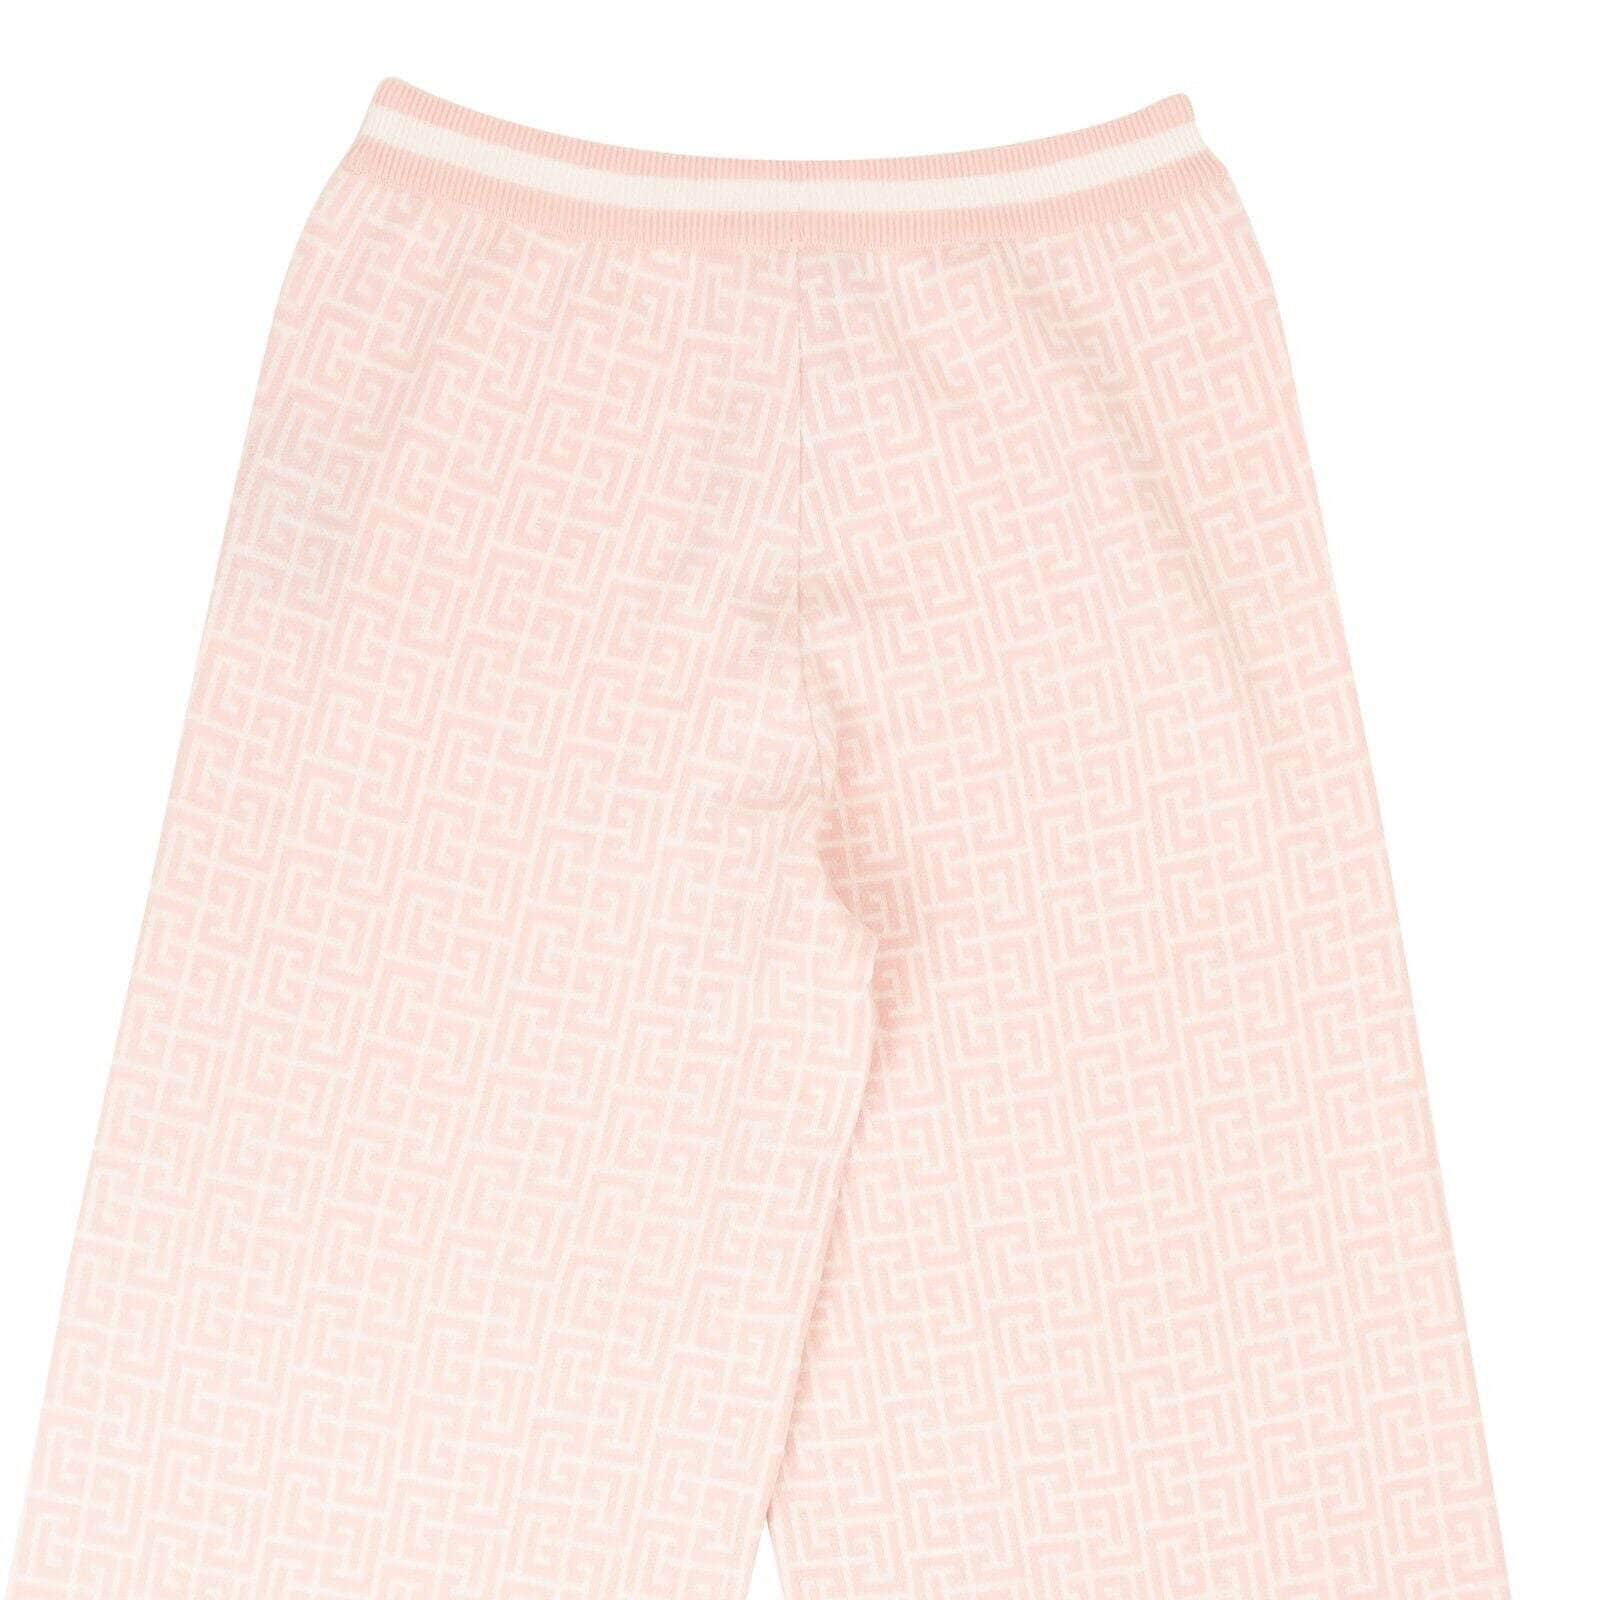 Balmain 1000-2000, channelenable-all, chicmi, couponcollection, gender-womens, main-clothing, size-42, womens-joggers-sweatpants 42 Pink Balmain Drawstring Palazzo Trousers 95-BLM-1006/42 95-BLM-1006/42